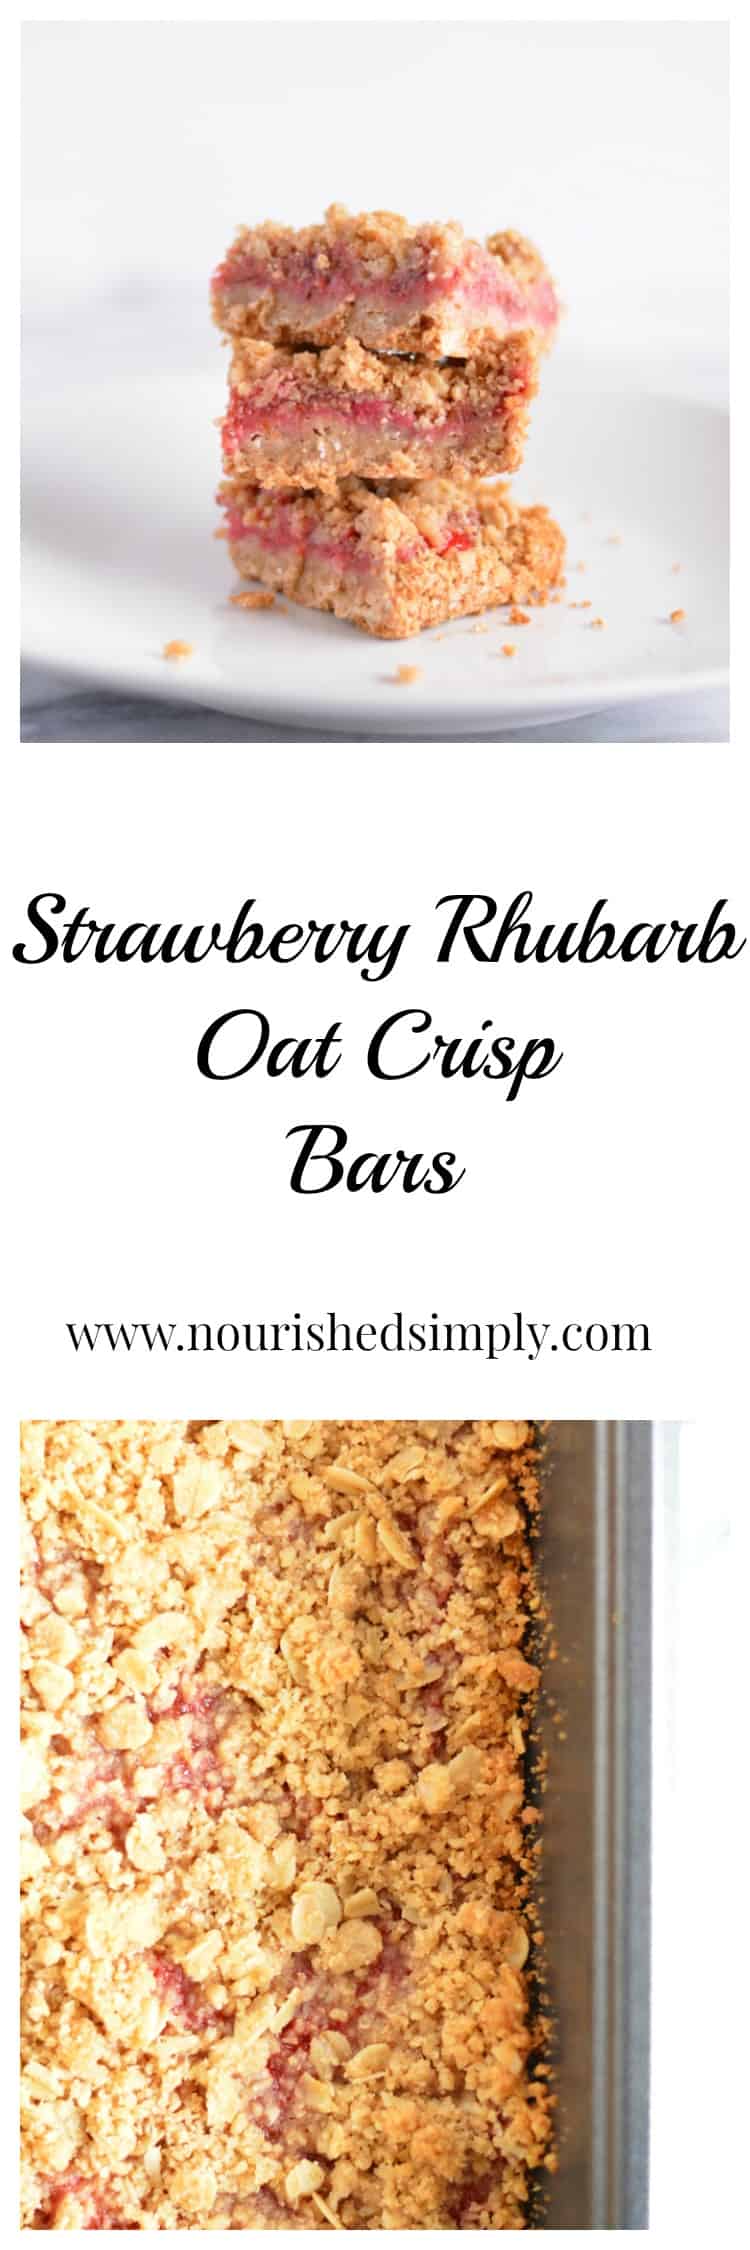 Strawberry Rhubarb Oat Crisp Bars are full of fiber with oats, oat bran, and chia seeds!